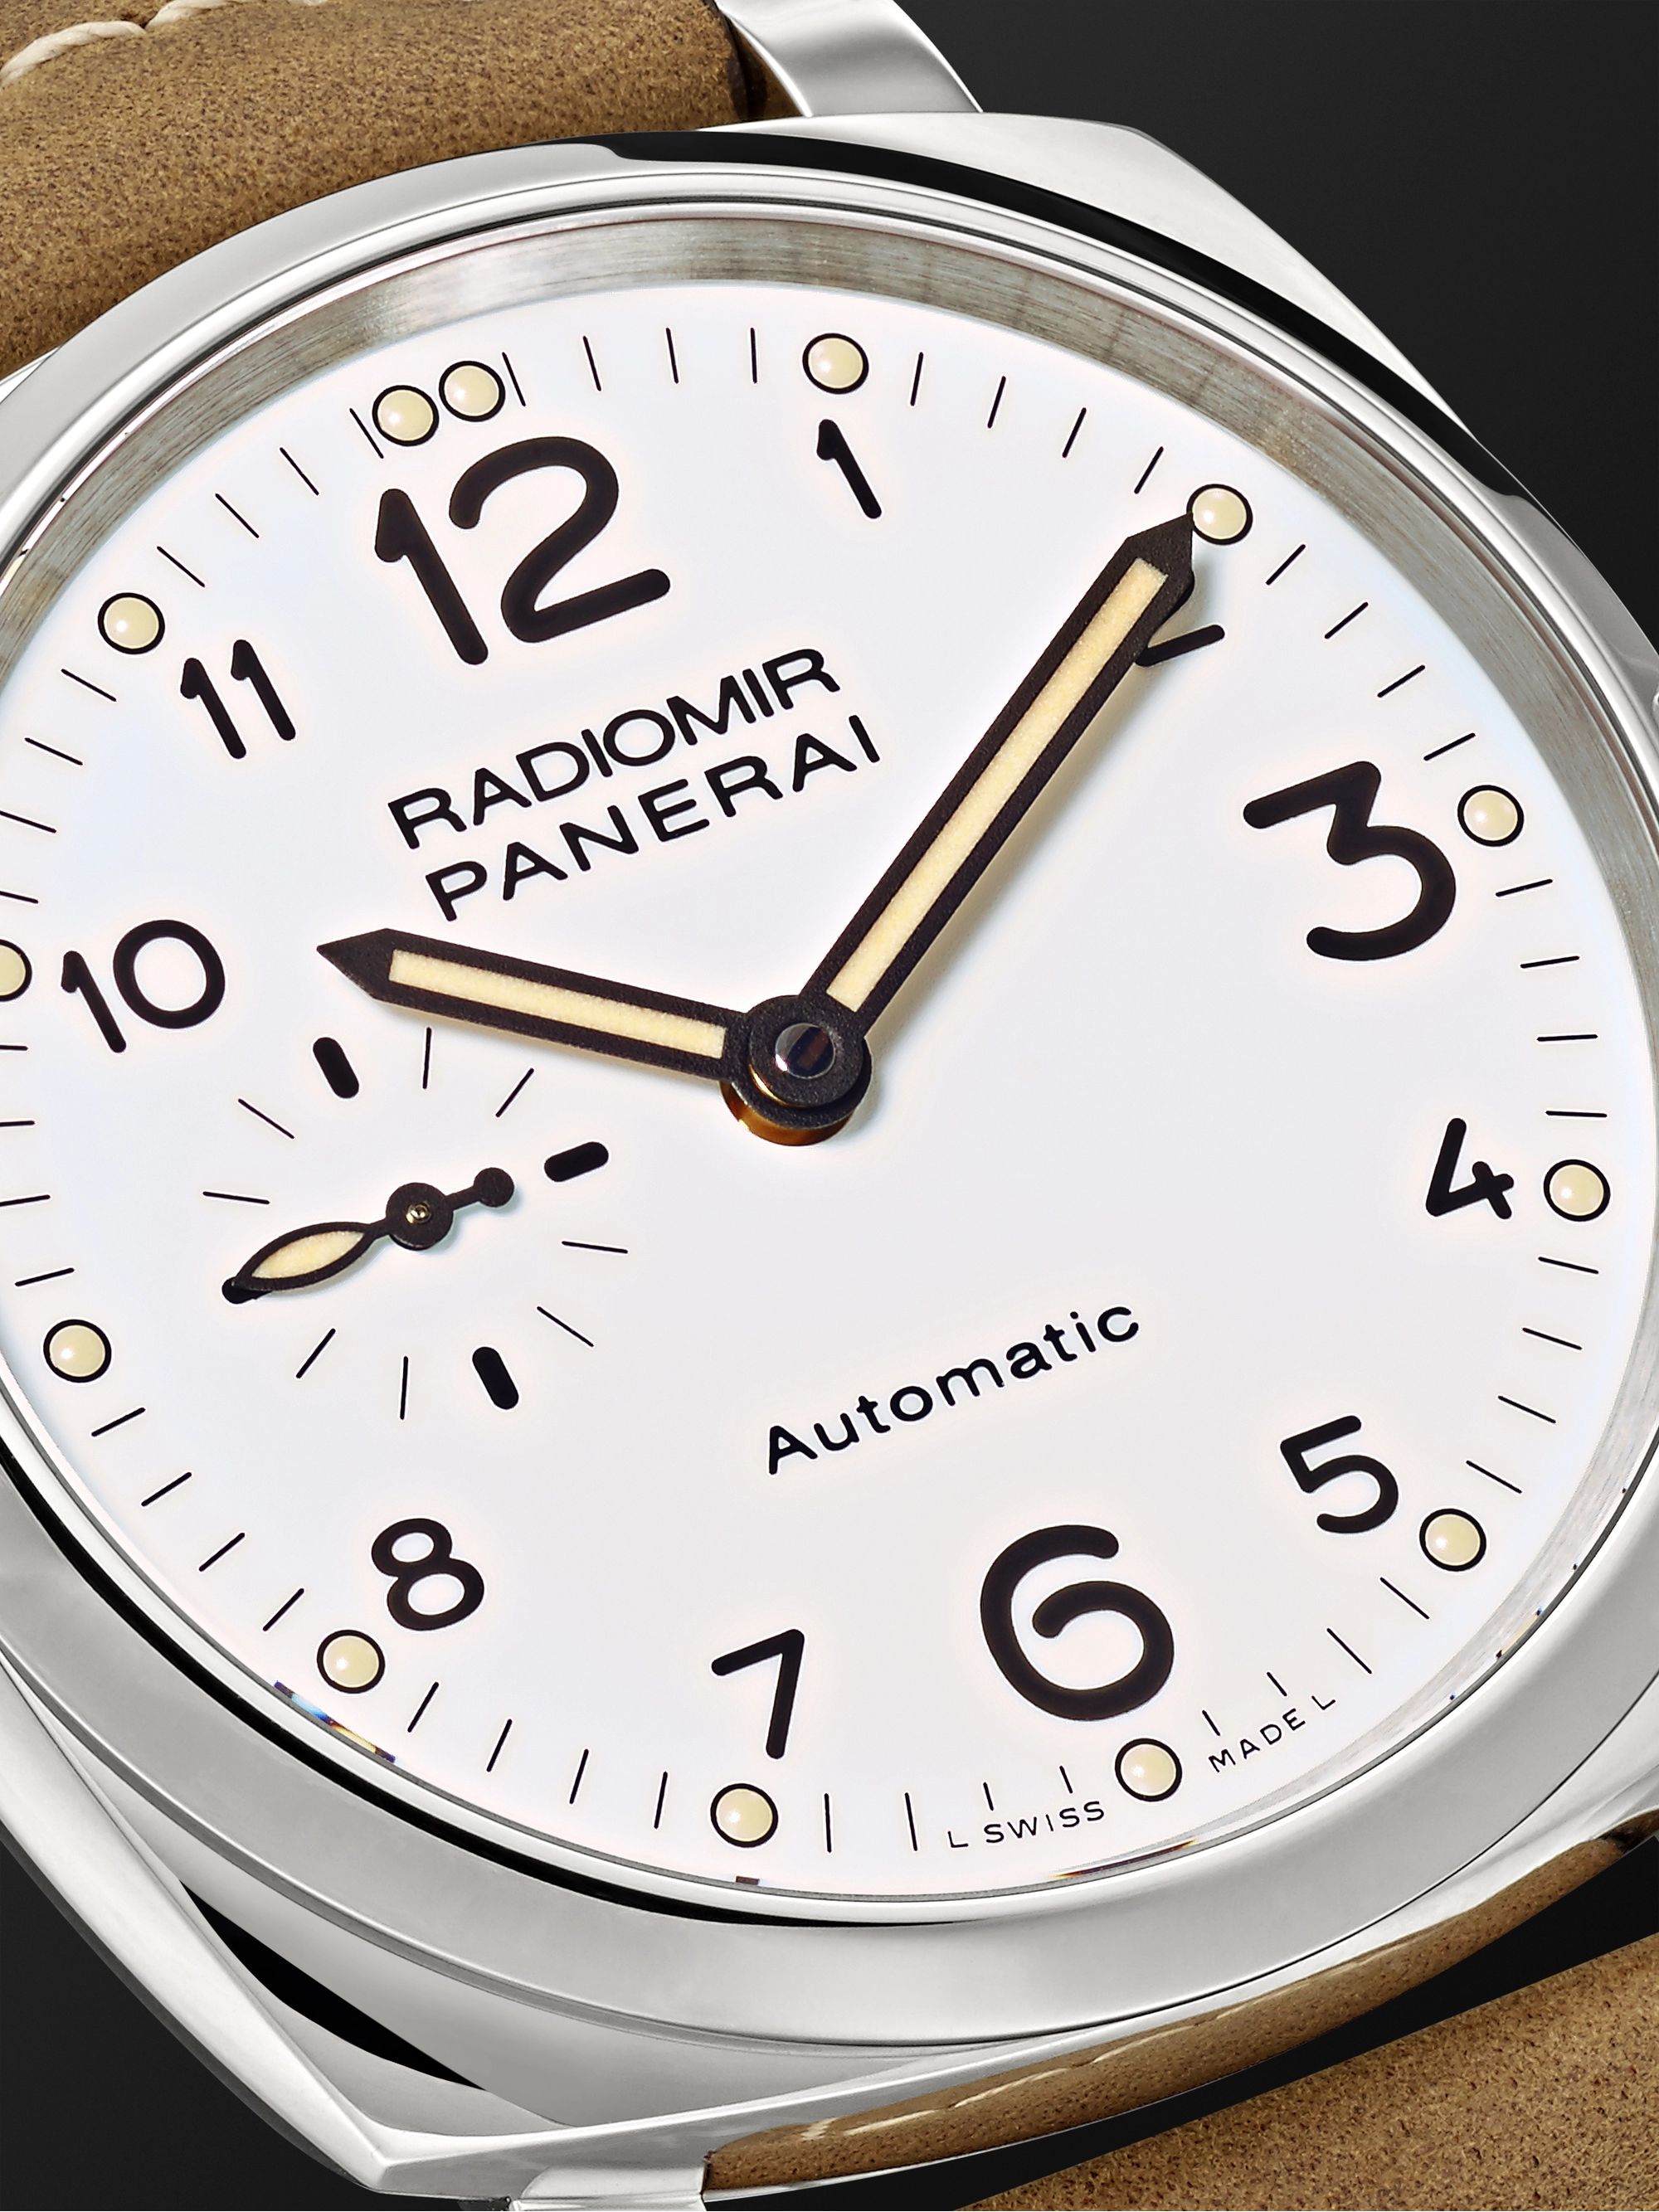 PANERAI Radiomir Automatic 42mm Stainless Steel and Leather Watch, Ref. No. PAM00655